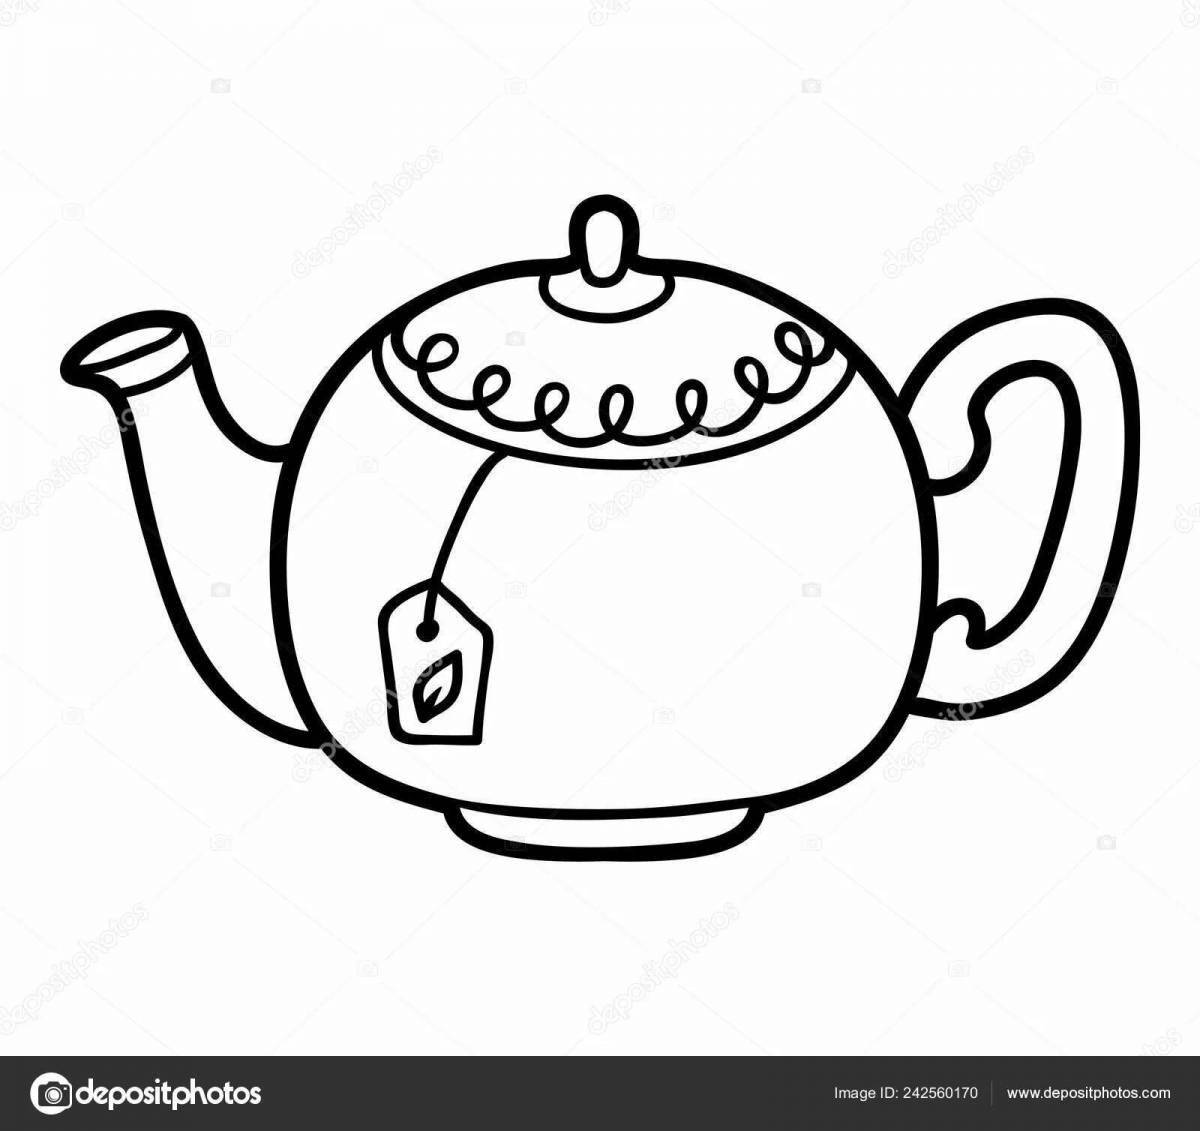 Coloring book bright teapot for children 2-3 years old